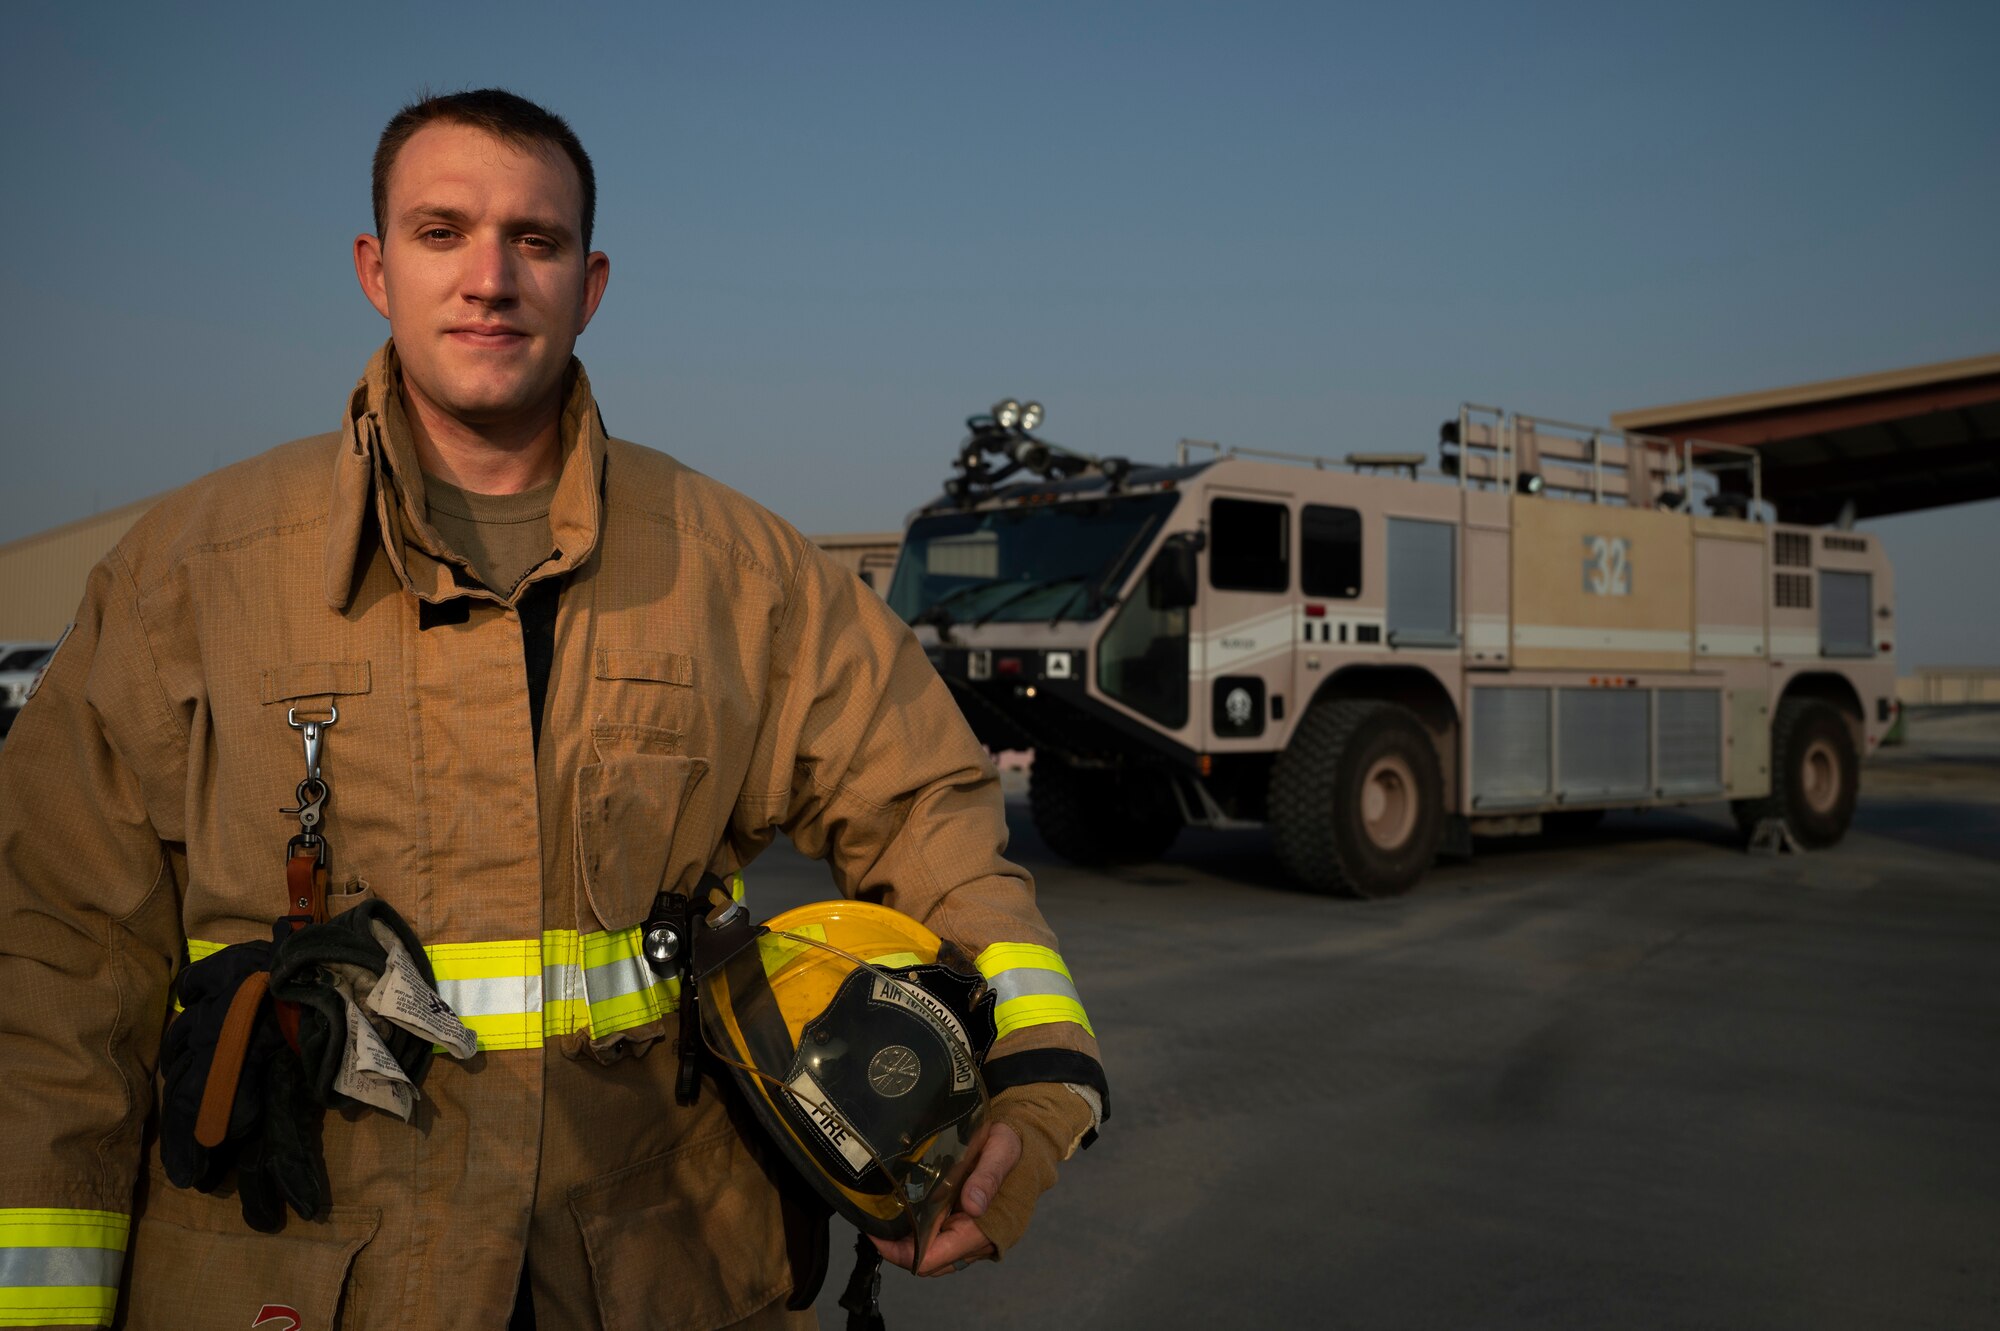 U.S. Air Force Staff Sgt. Nicholas Tafanelli, 386th Expeditionary Civil Engineer Squadron fire protection, is stationed at Ali Al Salem Air Base, Kuwait, August 2, 2022. Tafanelli was recently recognized at the United Service Organizations Service Member of the Year award for responding to 318 emergencies, including 61 fires and 128 motor vehicle accidents as a firefighter in Topeka, Kansas. (U.S. Air Force photo by Staff Sgt. Dalton Williams)